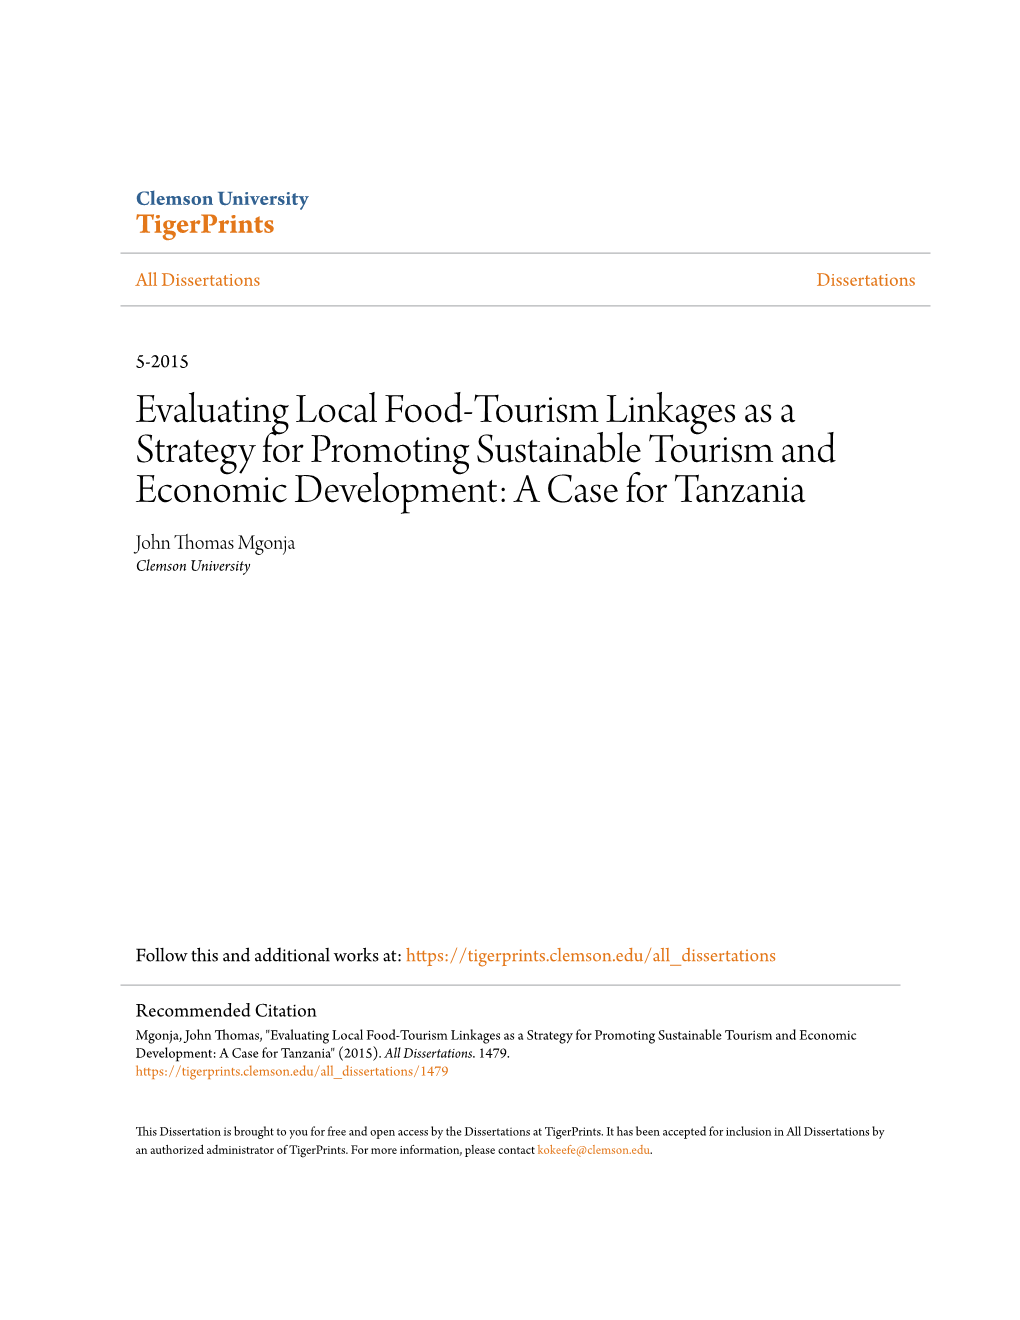 Evaluating Local Food-Tourism Linkages As a Strategy